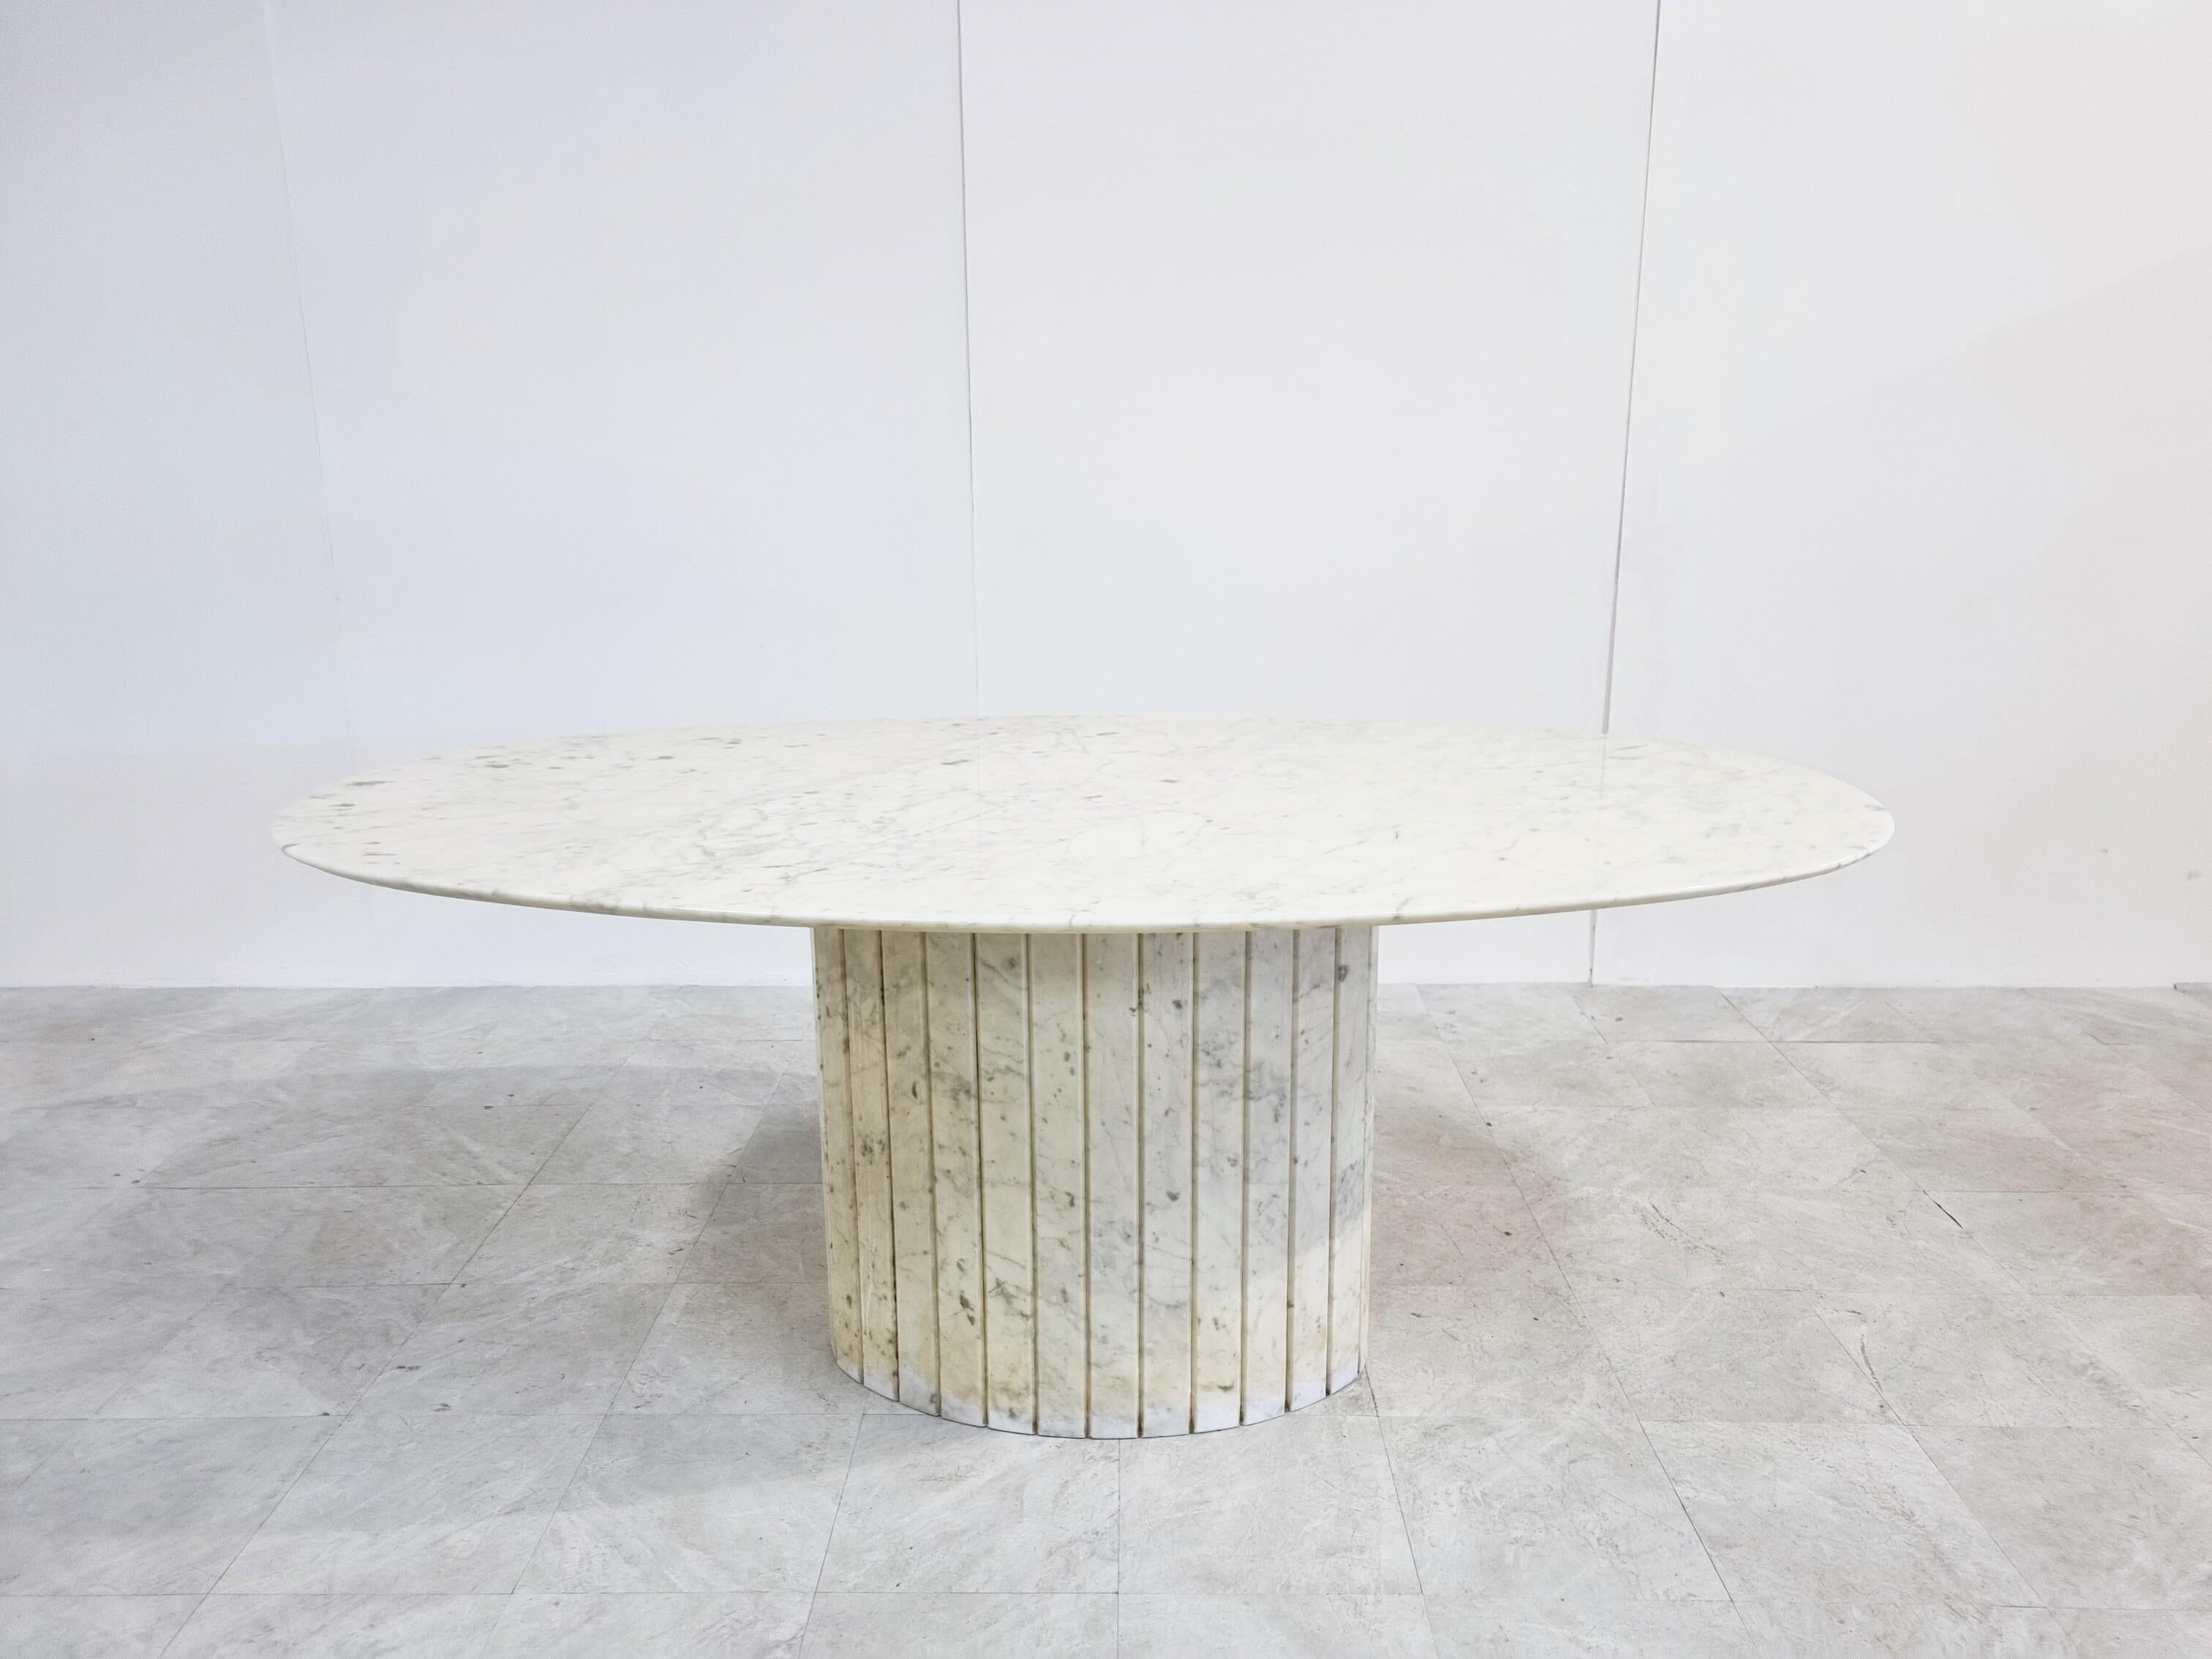 Stuning knife edge oval dining table made from white marble on a slatted marble base.

Beautiful veined marble.

The table is in good condition, no damages. Only some yellow shine to the base due to age.

1970s - Italy

Height: